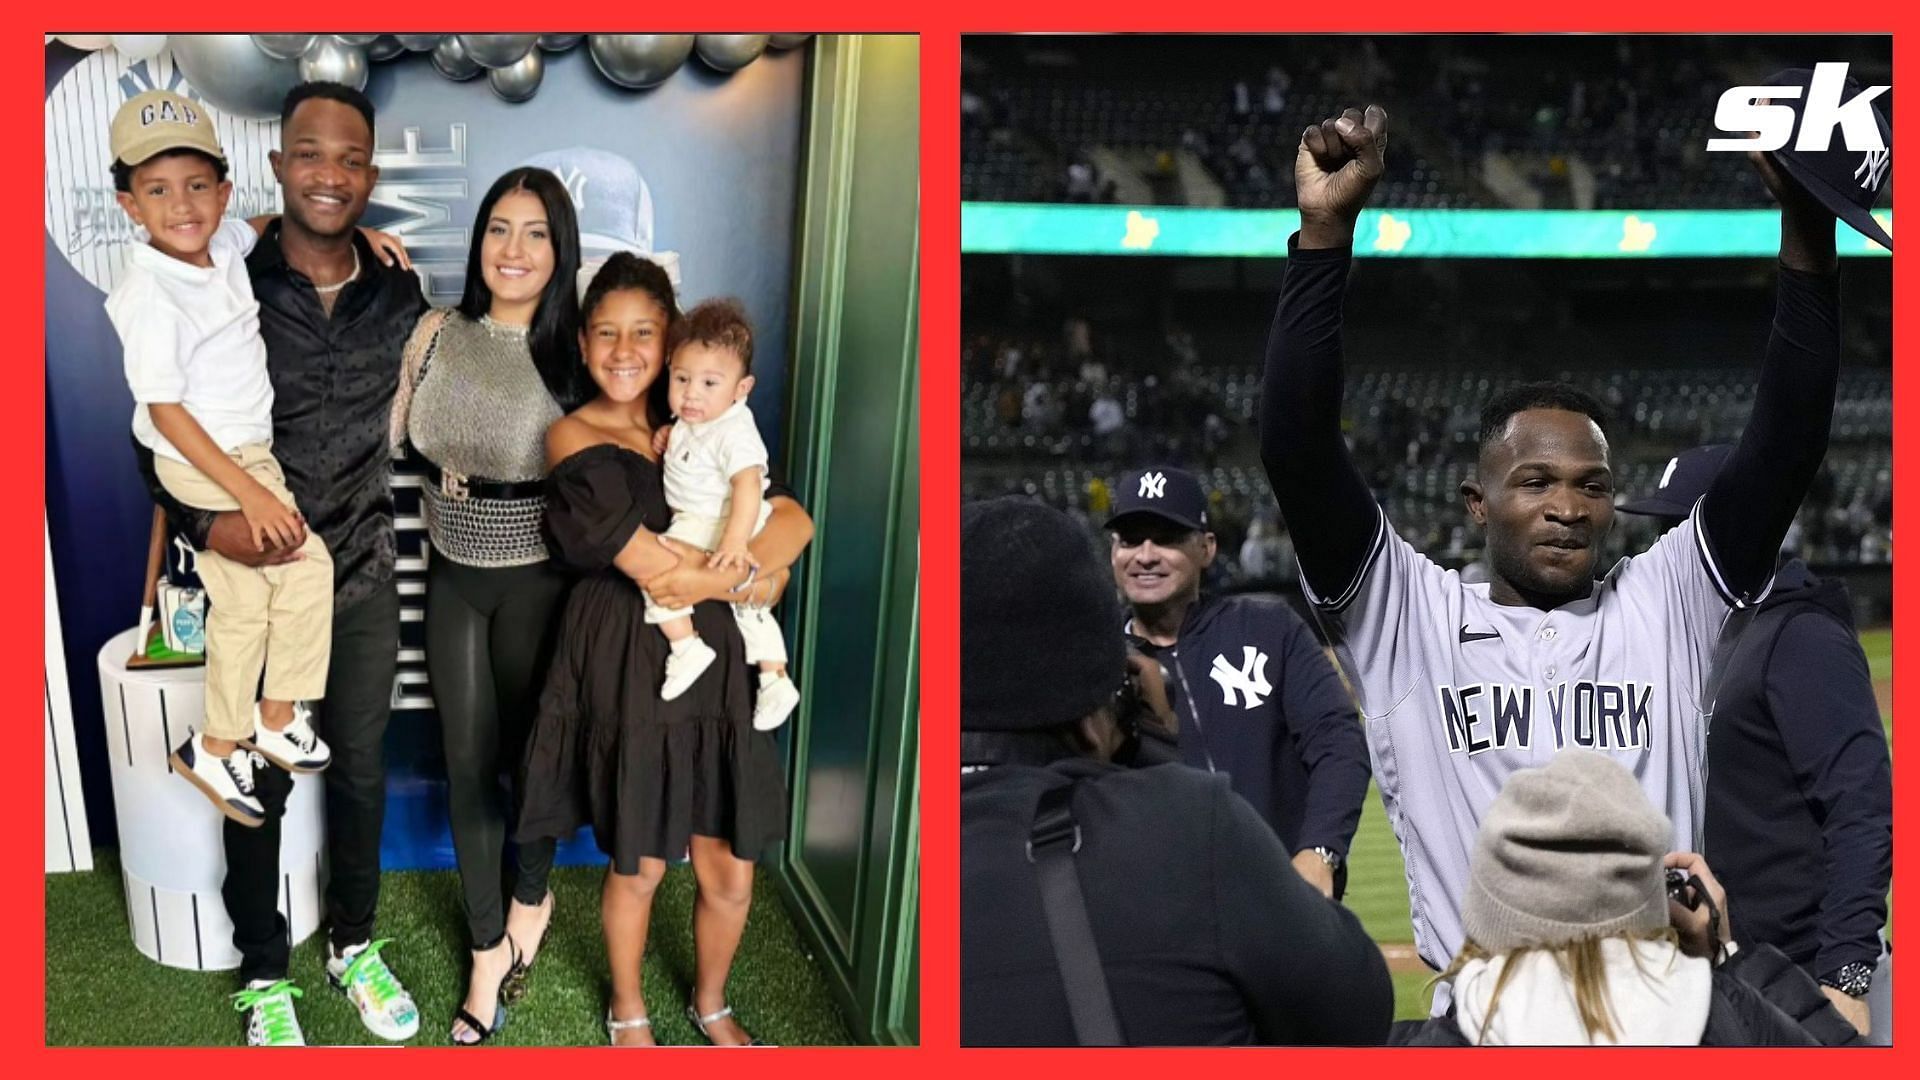 Domingo Germán's wife threw him a perfect game celebration and the